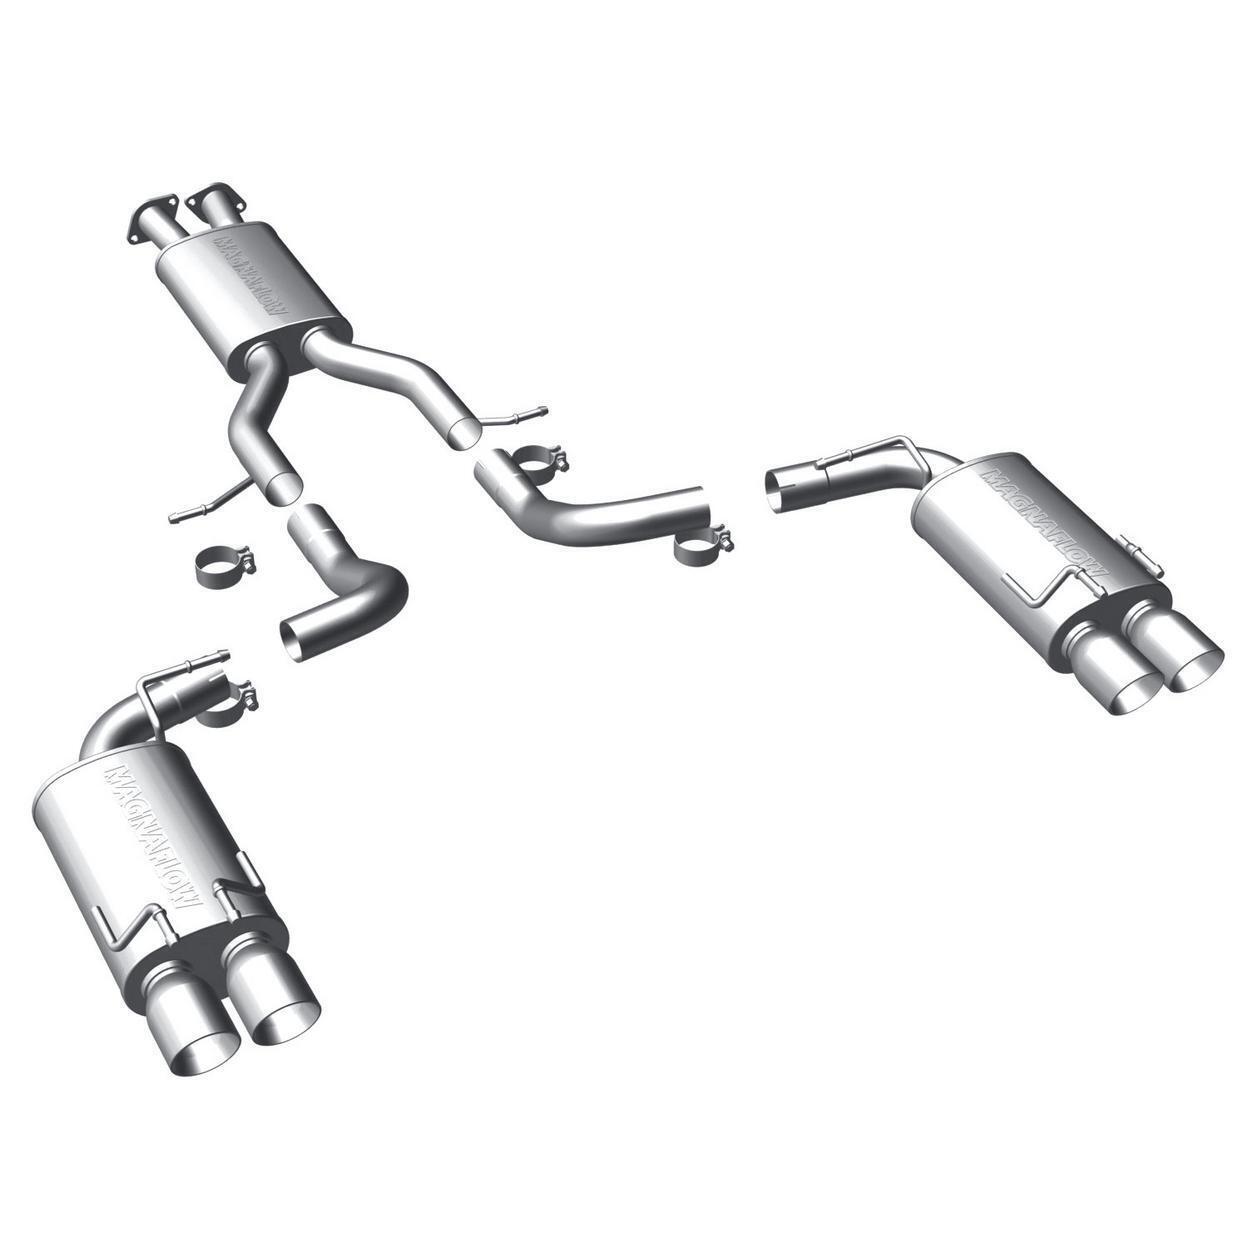 MagnaFlow Exhaust System Kit - Fits: 1990-1995 Nissan 300zx Street Series Stainl